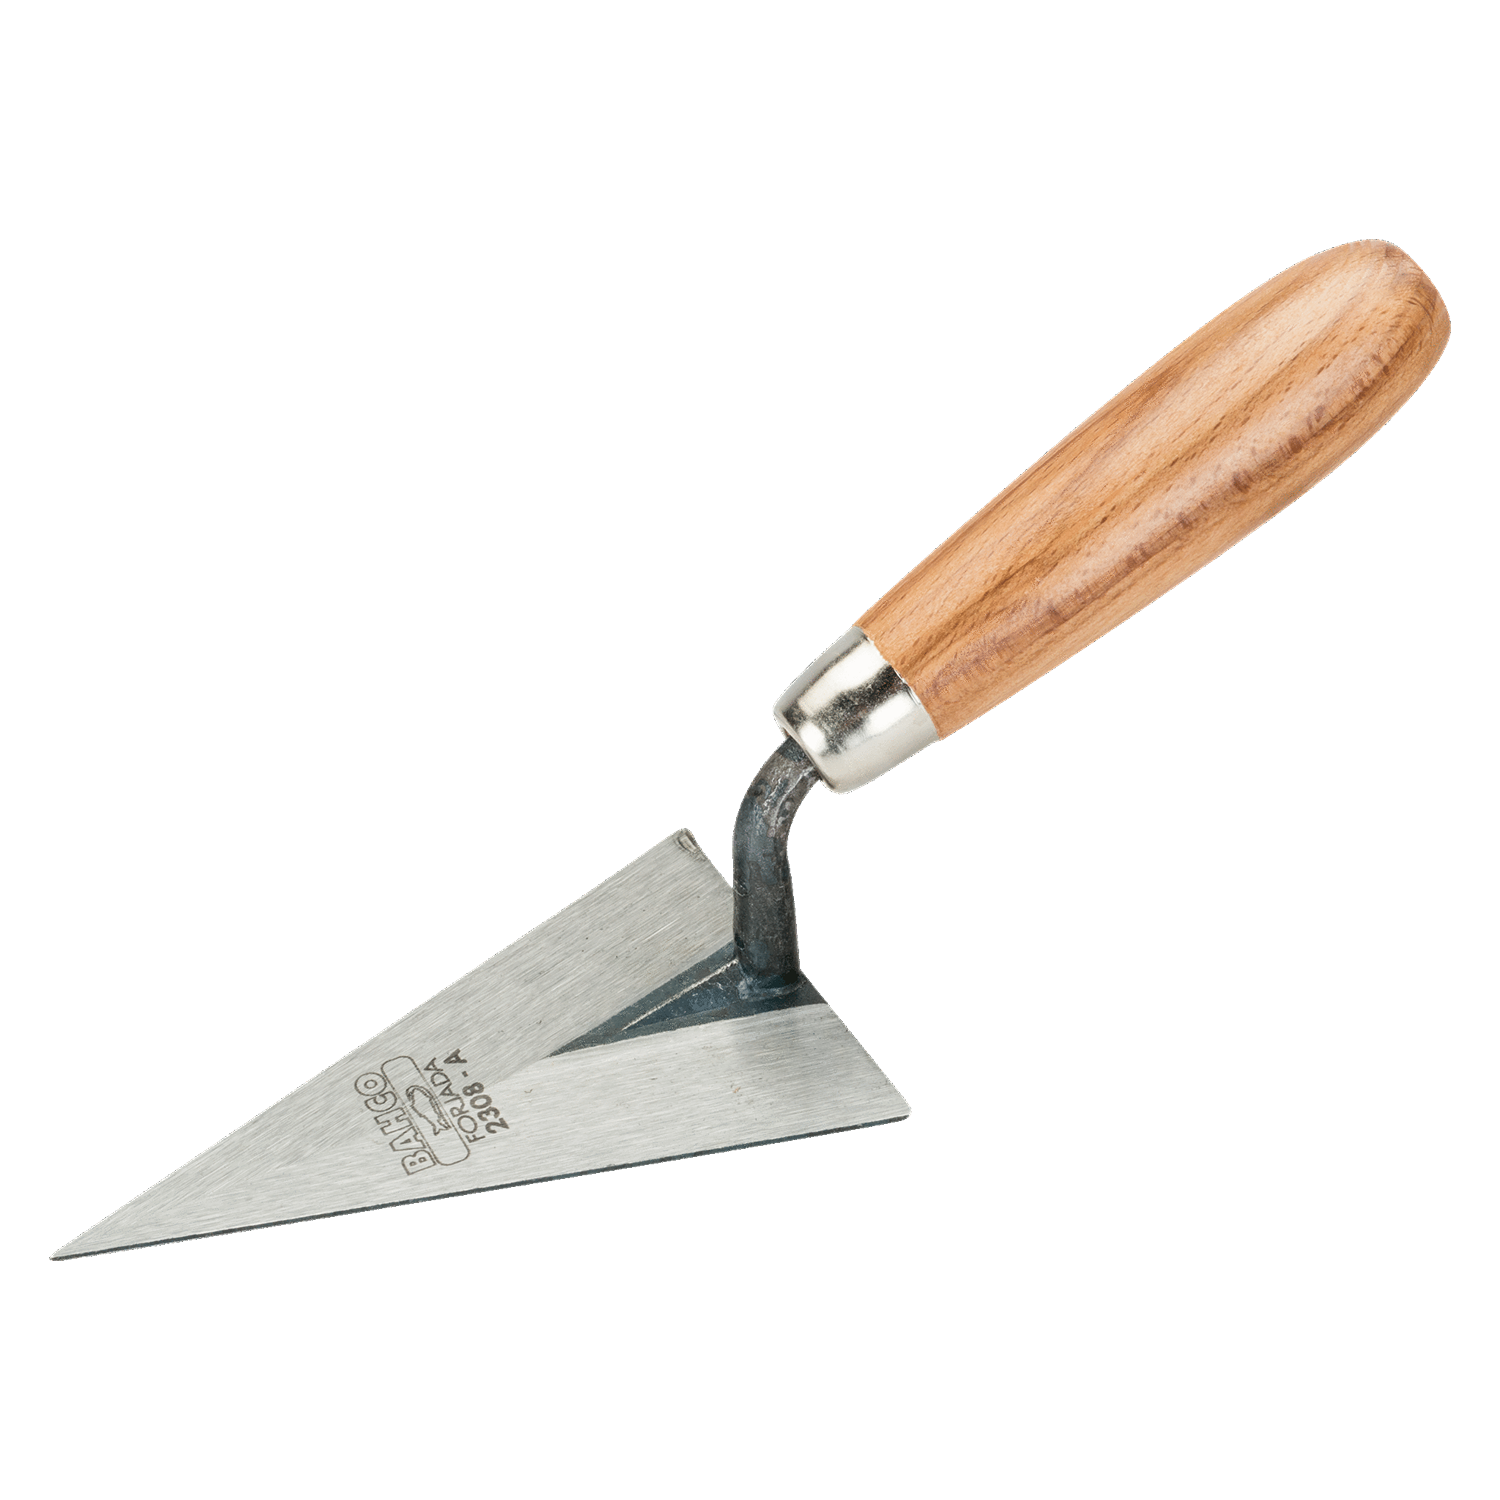 BAHCO 2308 Masonry Trowels with Sharp Tipped Blade& Wooden Handle - Premium Masonry Trowels from BAHCO - Shop now at Yew Aik.